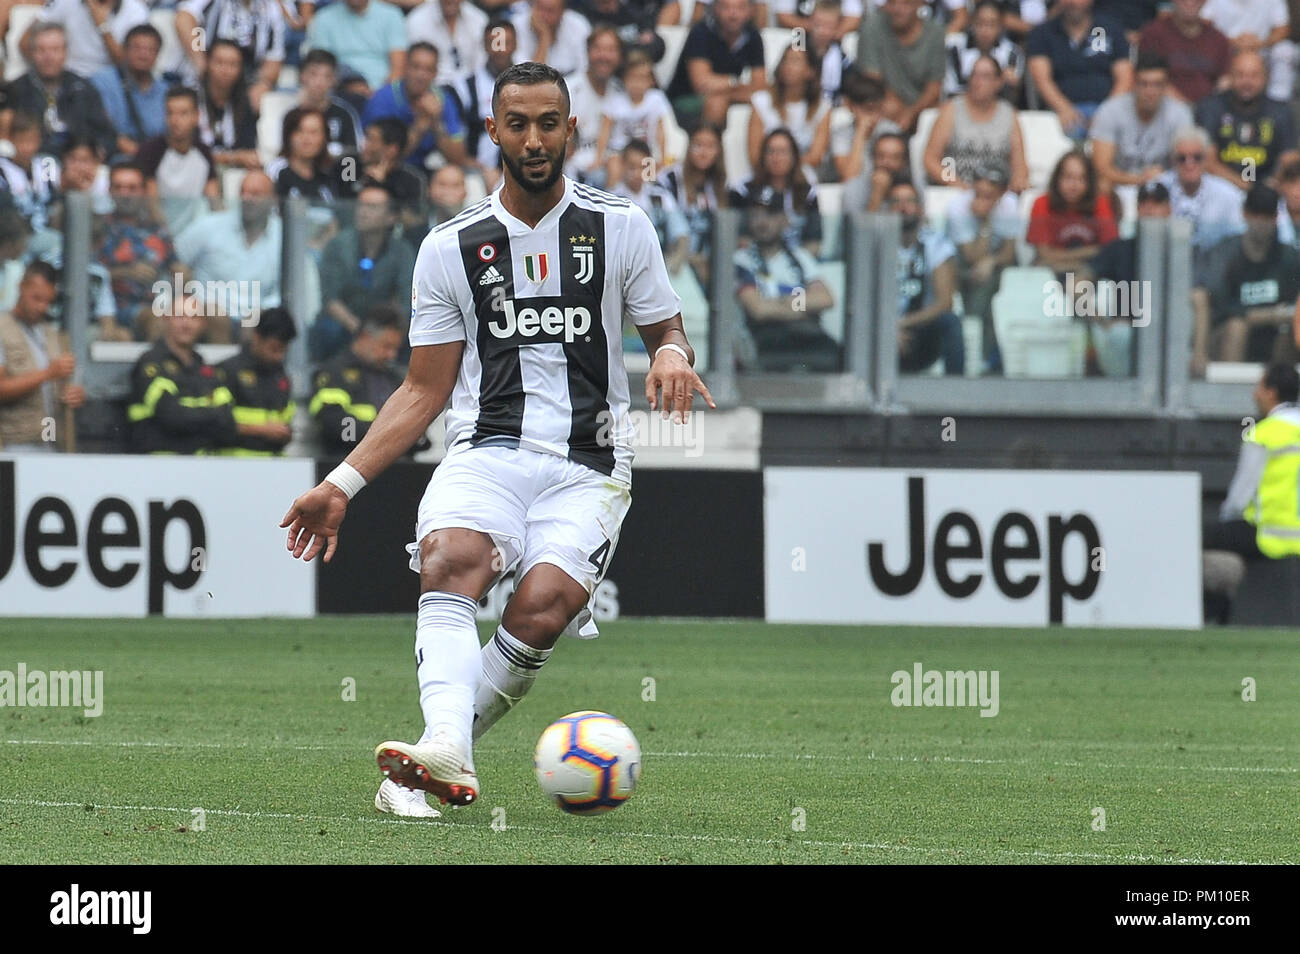 Turin, Italy. 16th Sep, 2018. Medhi Benatia of Juventus FC during the Serie A football match between Juventus FC and US Sassuolo at Allianz Stadium on 16 September, 2018 in Turin, Italy. Credit: FABIO PETROSINO/Alamy Live News Stock Photo